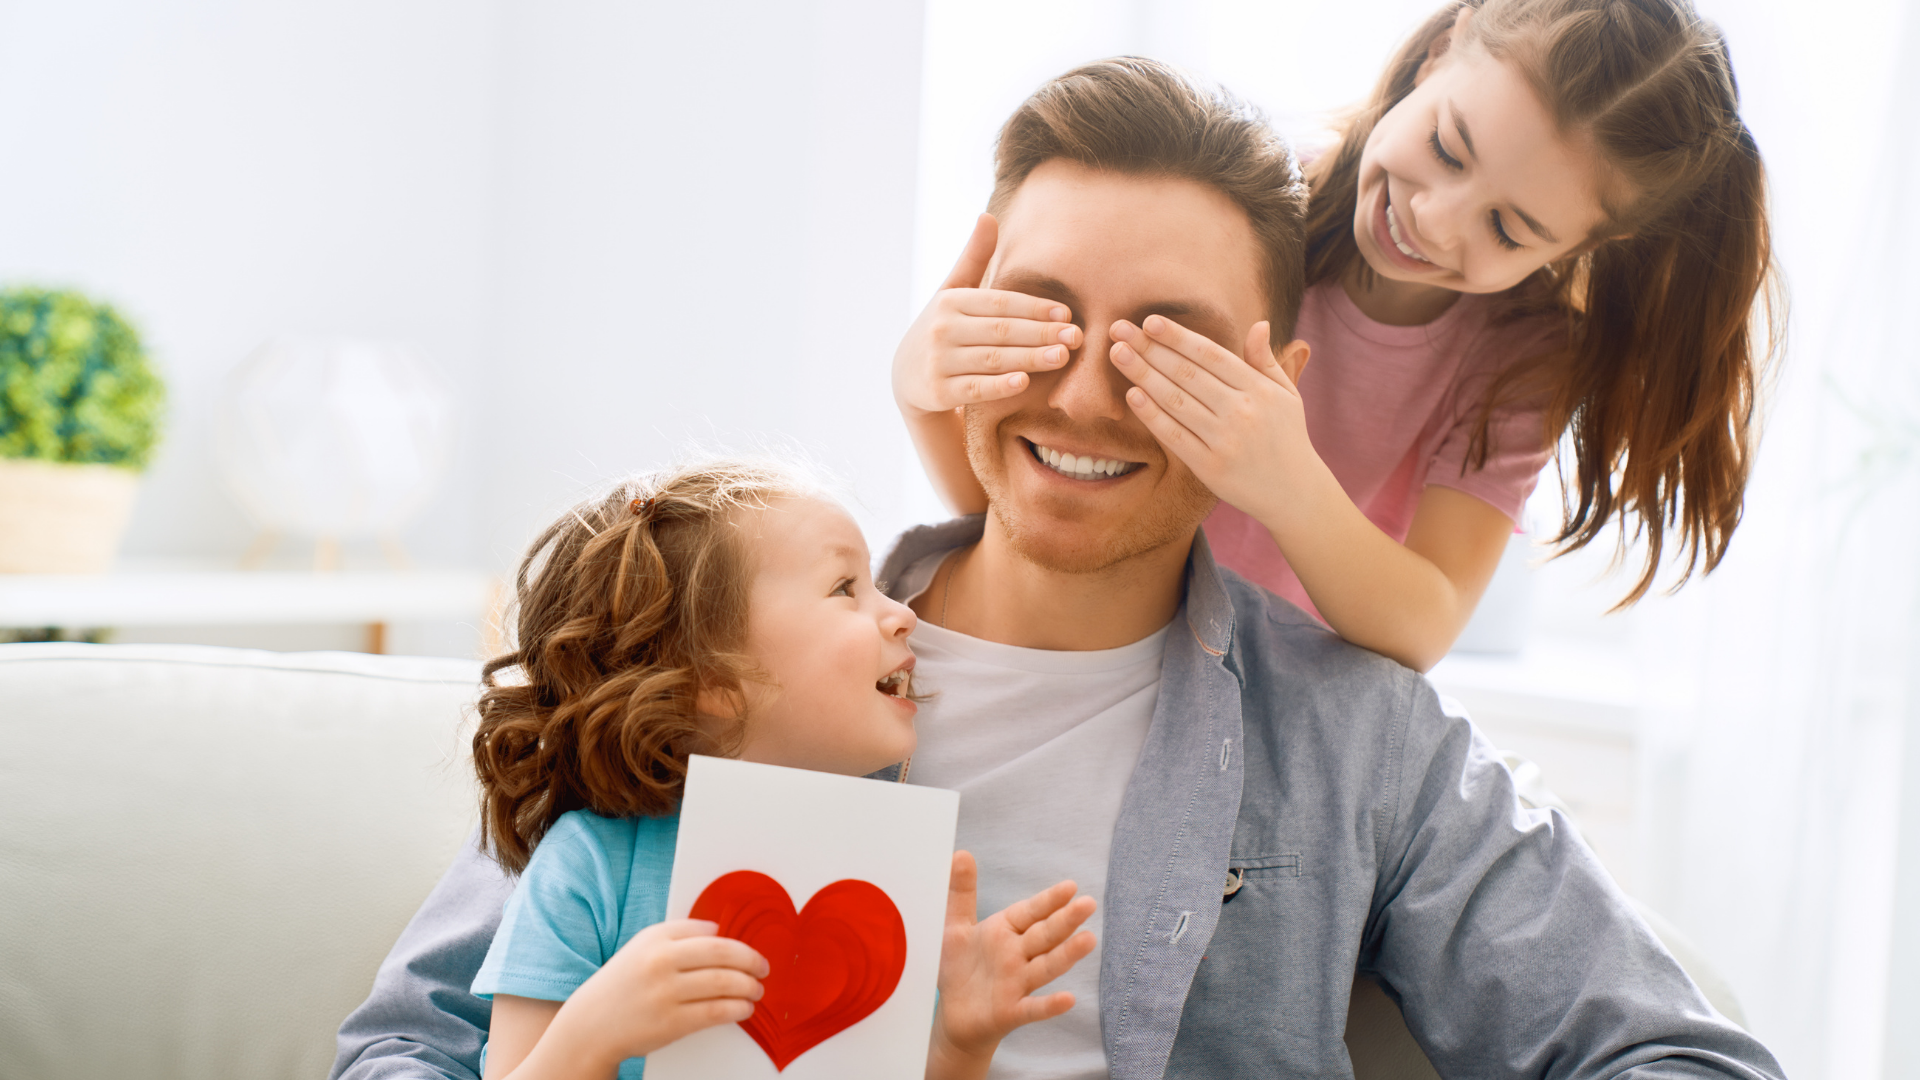 One daughter sat on dad's lap giving him a heart card whilst other daughter covers his eyes to surprise him on Father's Day